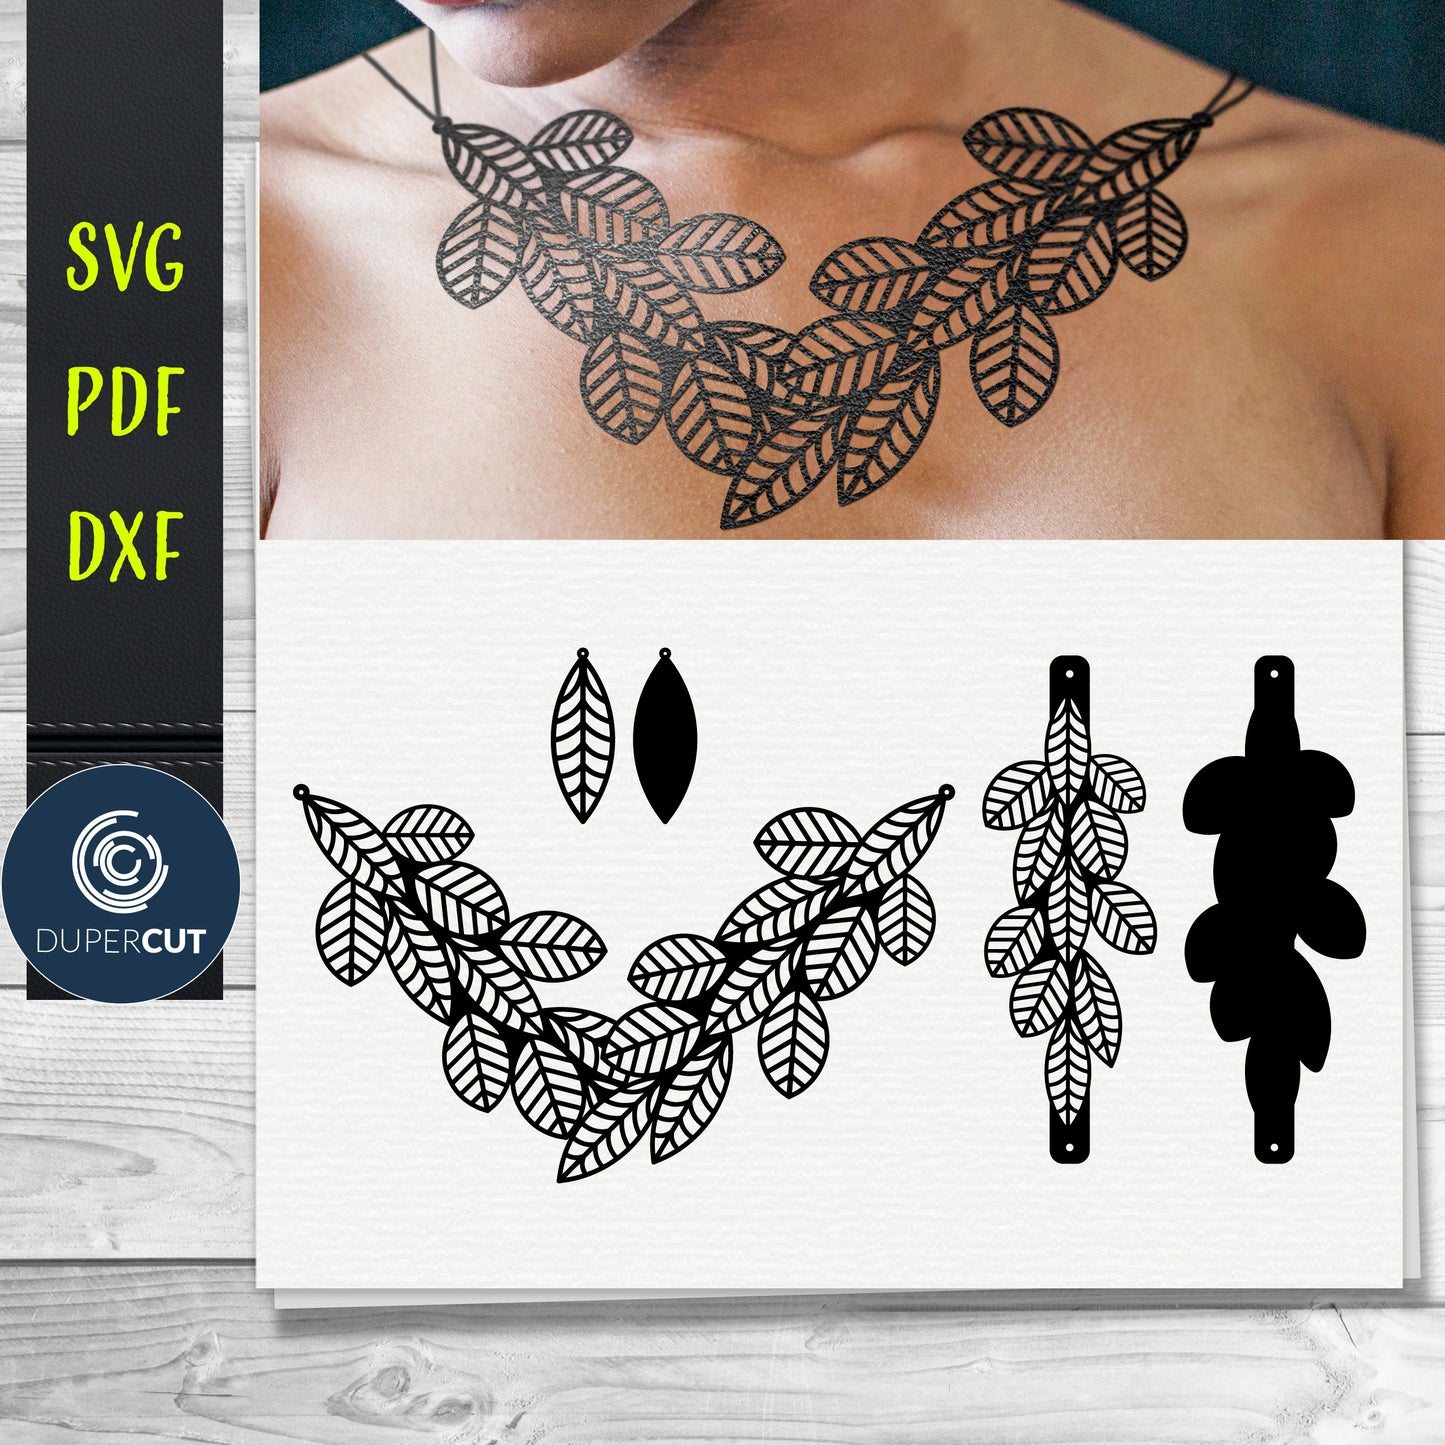 DIY Leather Earrings, necklace and bracelet set  SVG PDF DXF vector files. Jewellery making template for laser and cutting machines - Glowforge, Cricut, Silhouette Cameo.